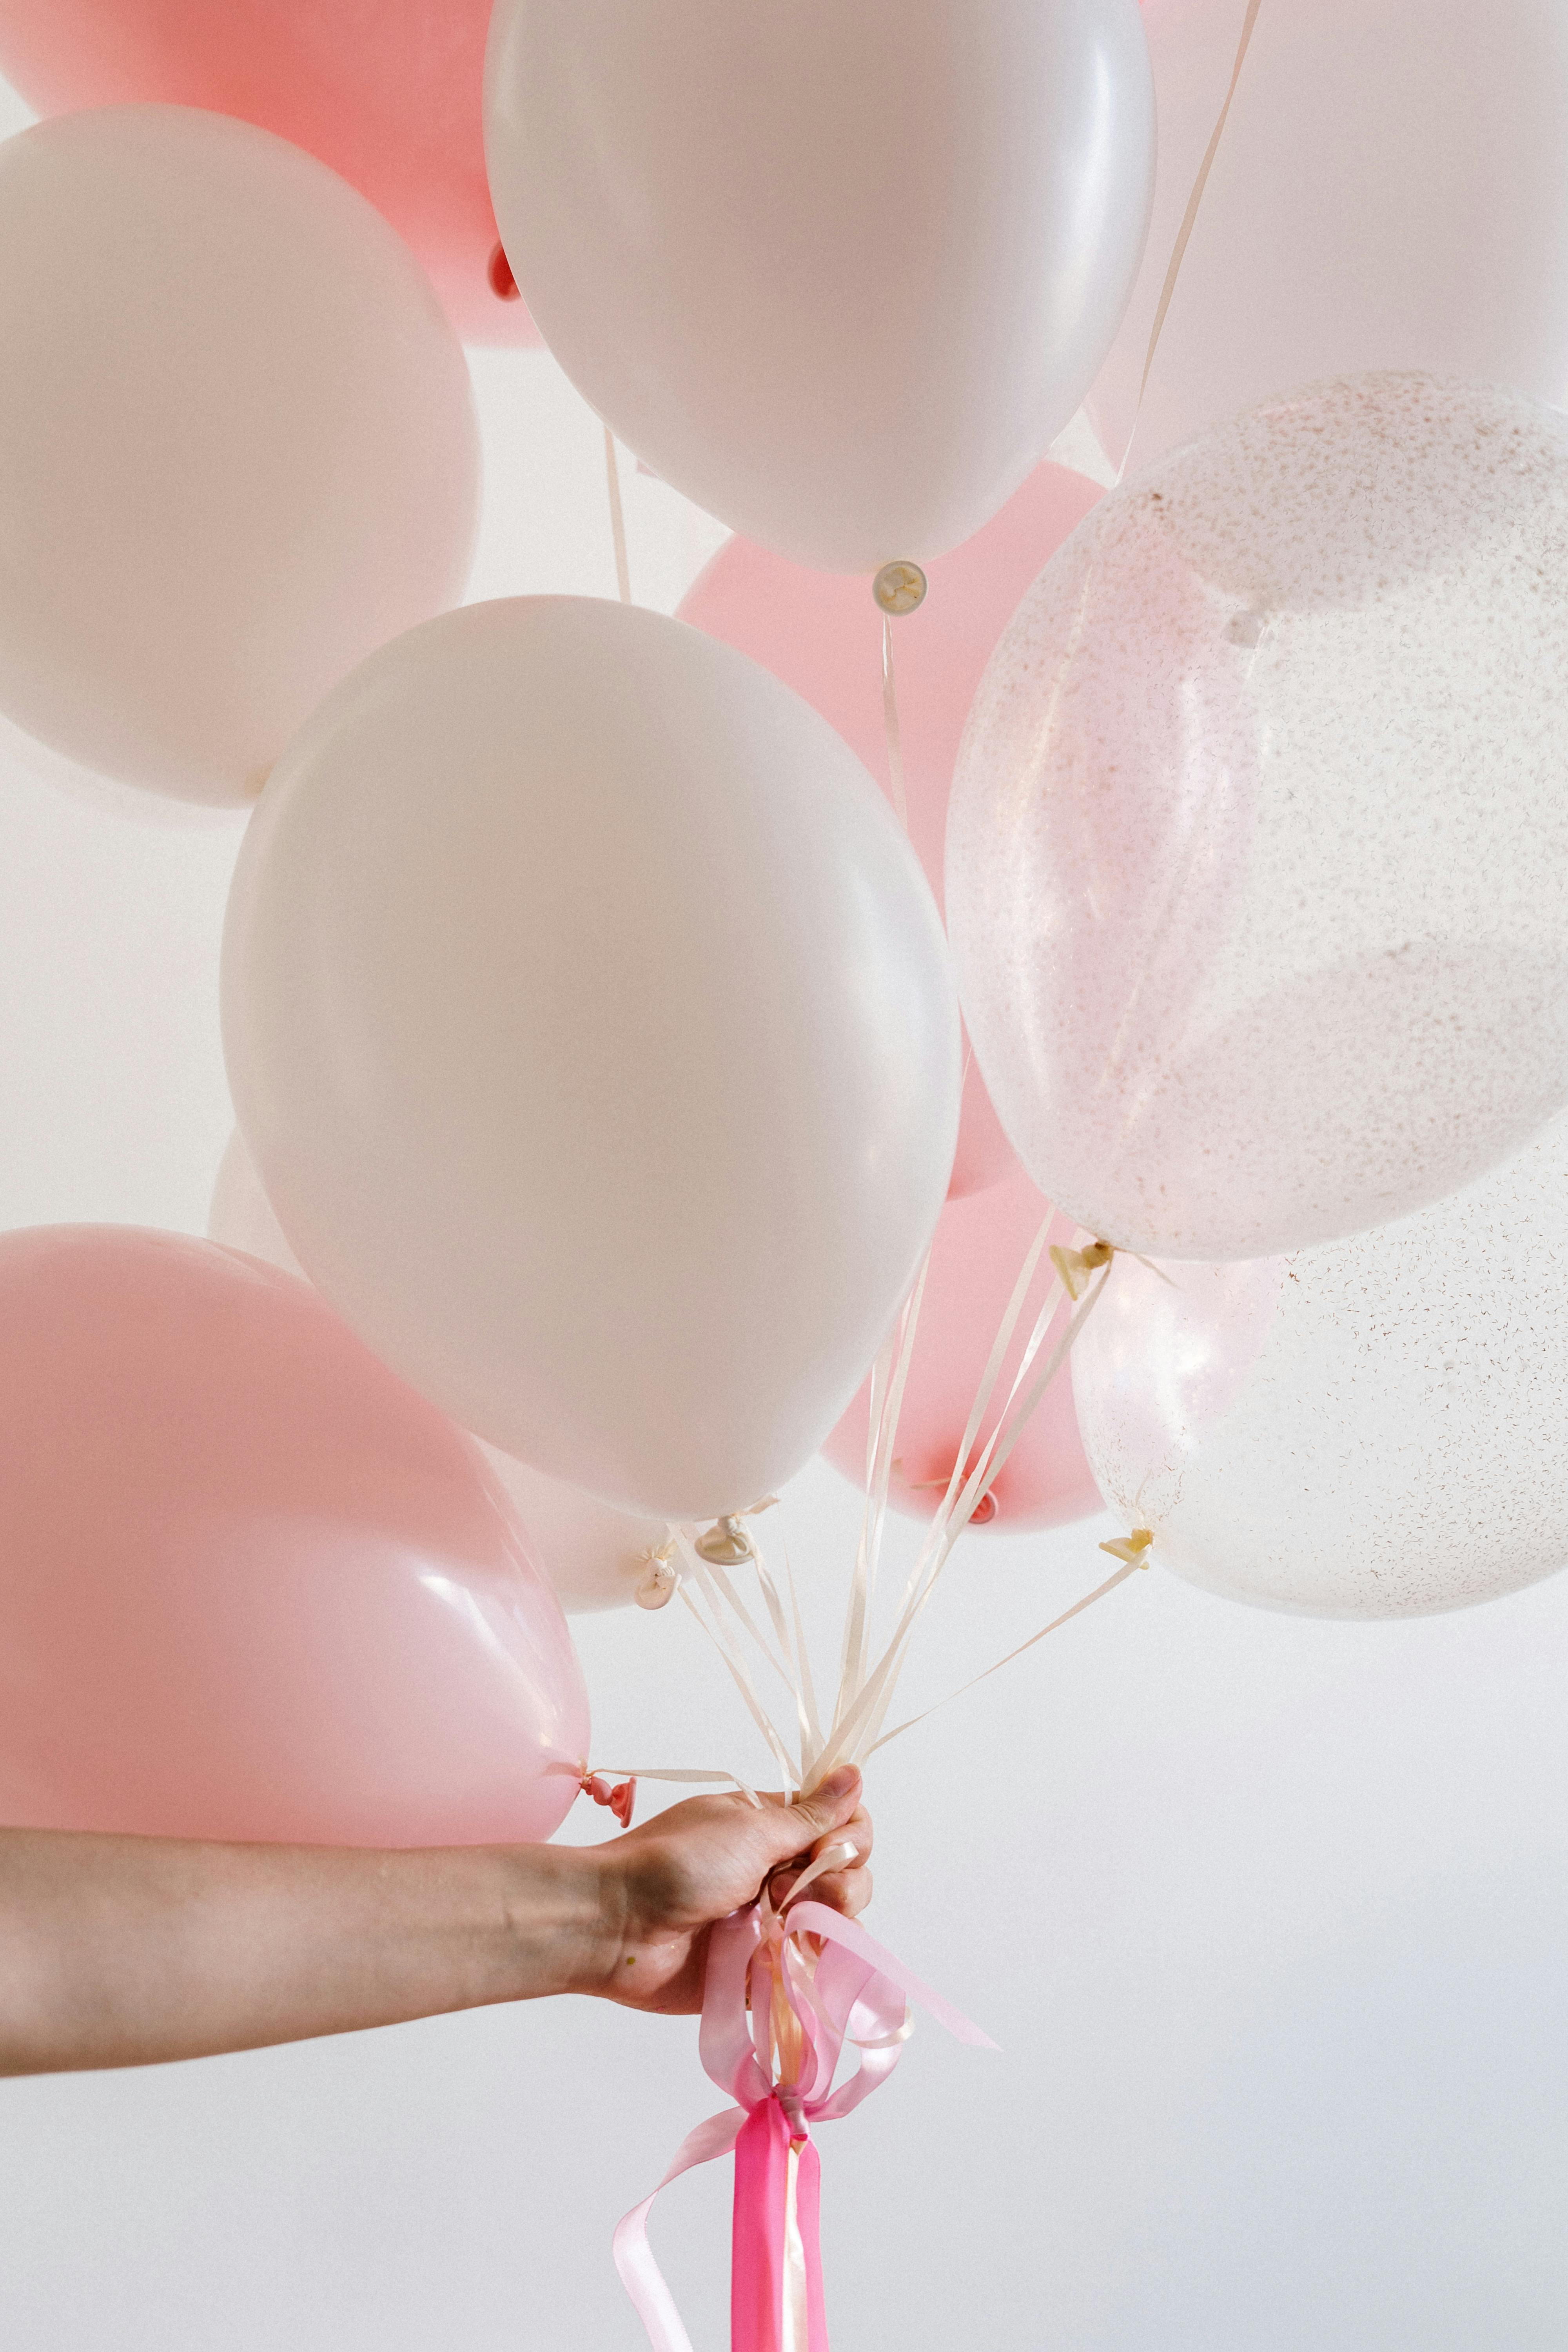 Hand with balloons | Source: Pexels